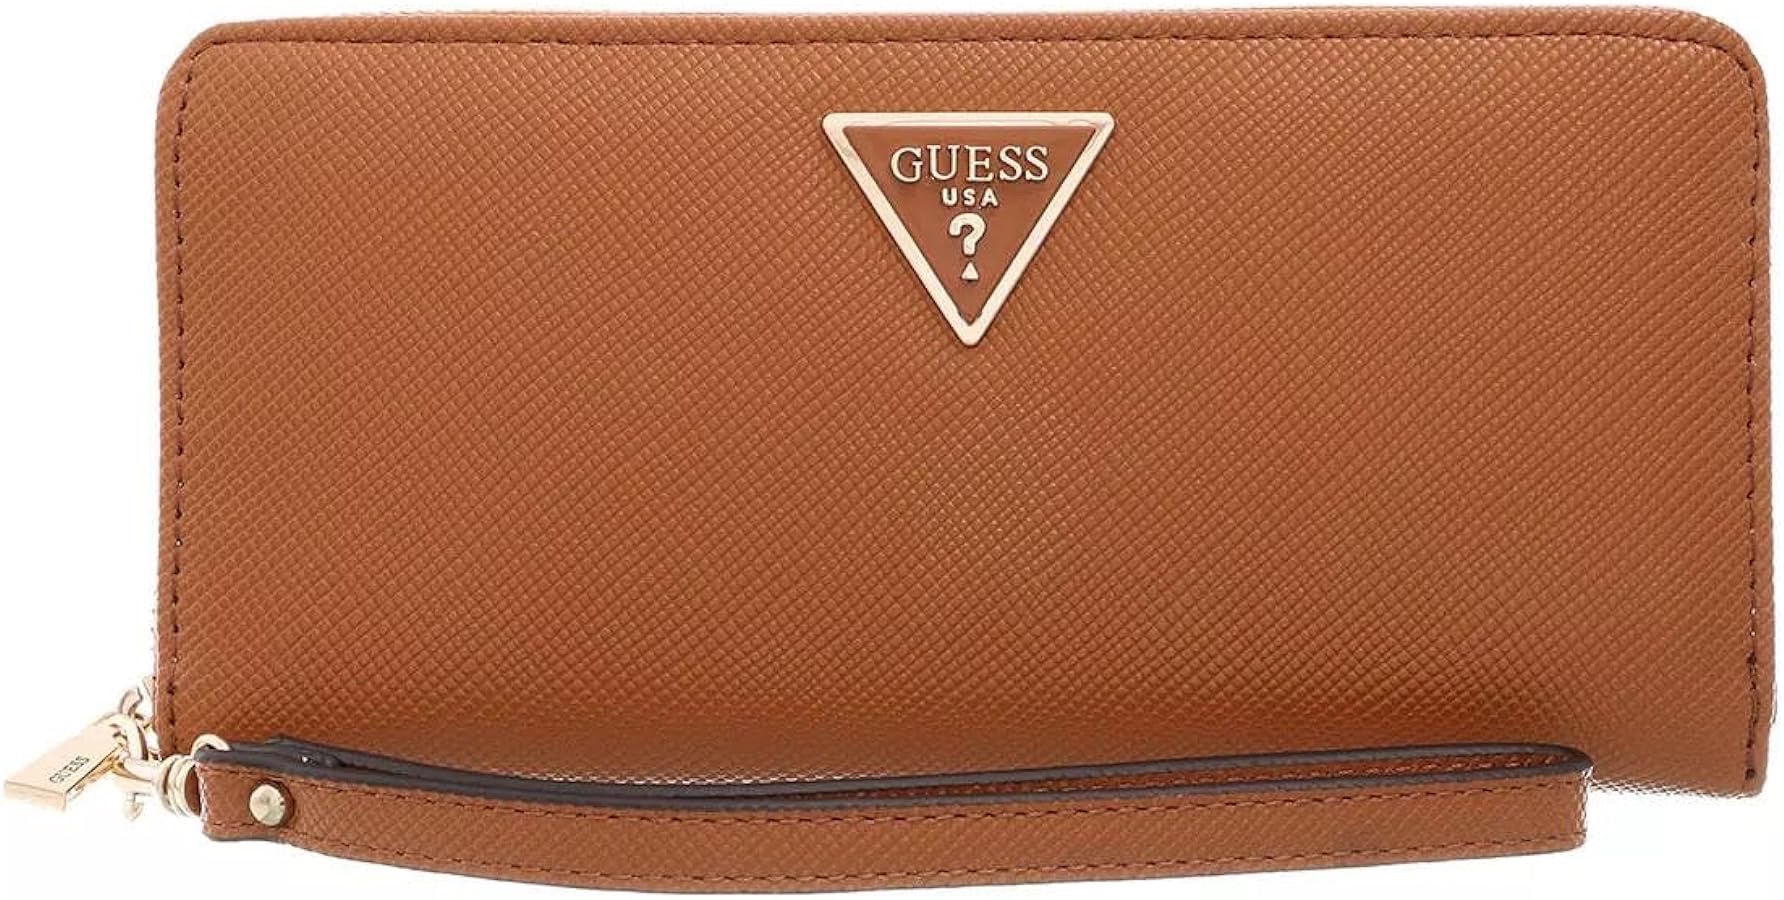 Amazon.com: GUESS Laurel Large Zip Around Wallet, Light Cognac : GUESS: Clothing, Shoes & Jewelry